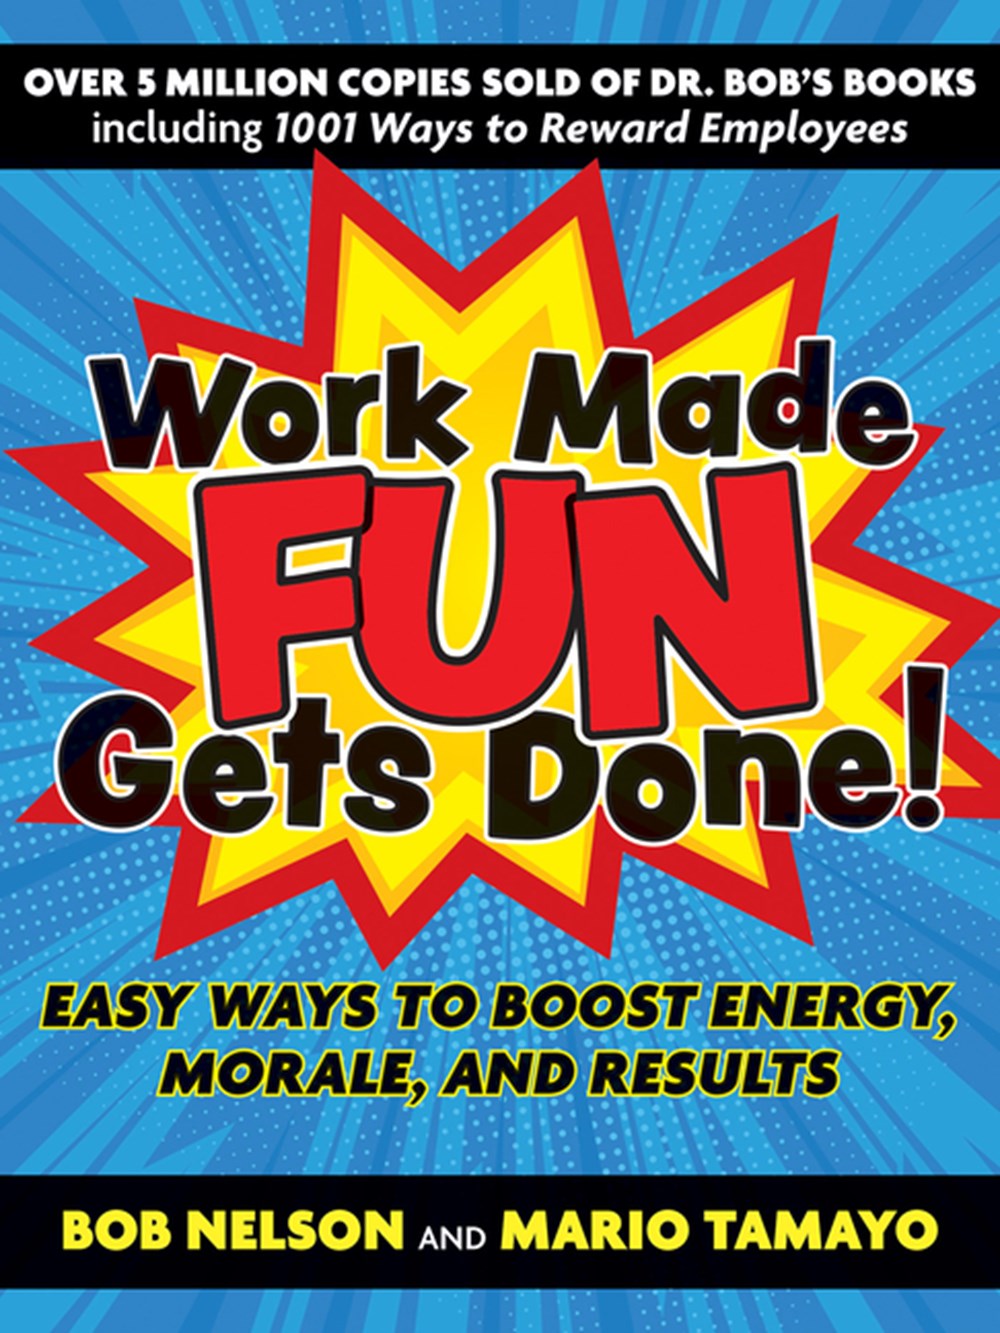 Work Made Fun Gets Done! Easy Ways to Boost Energy, Morale, and Results